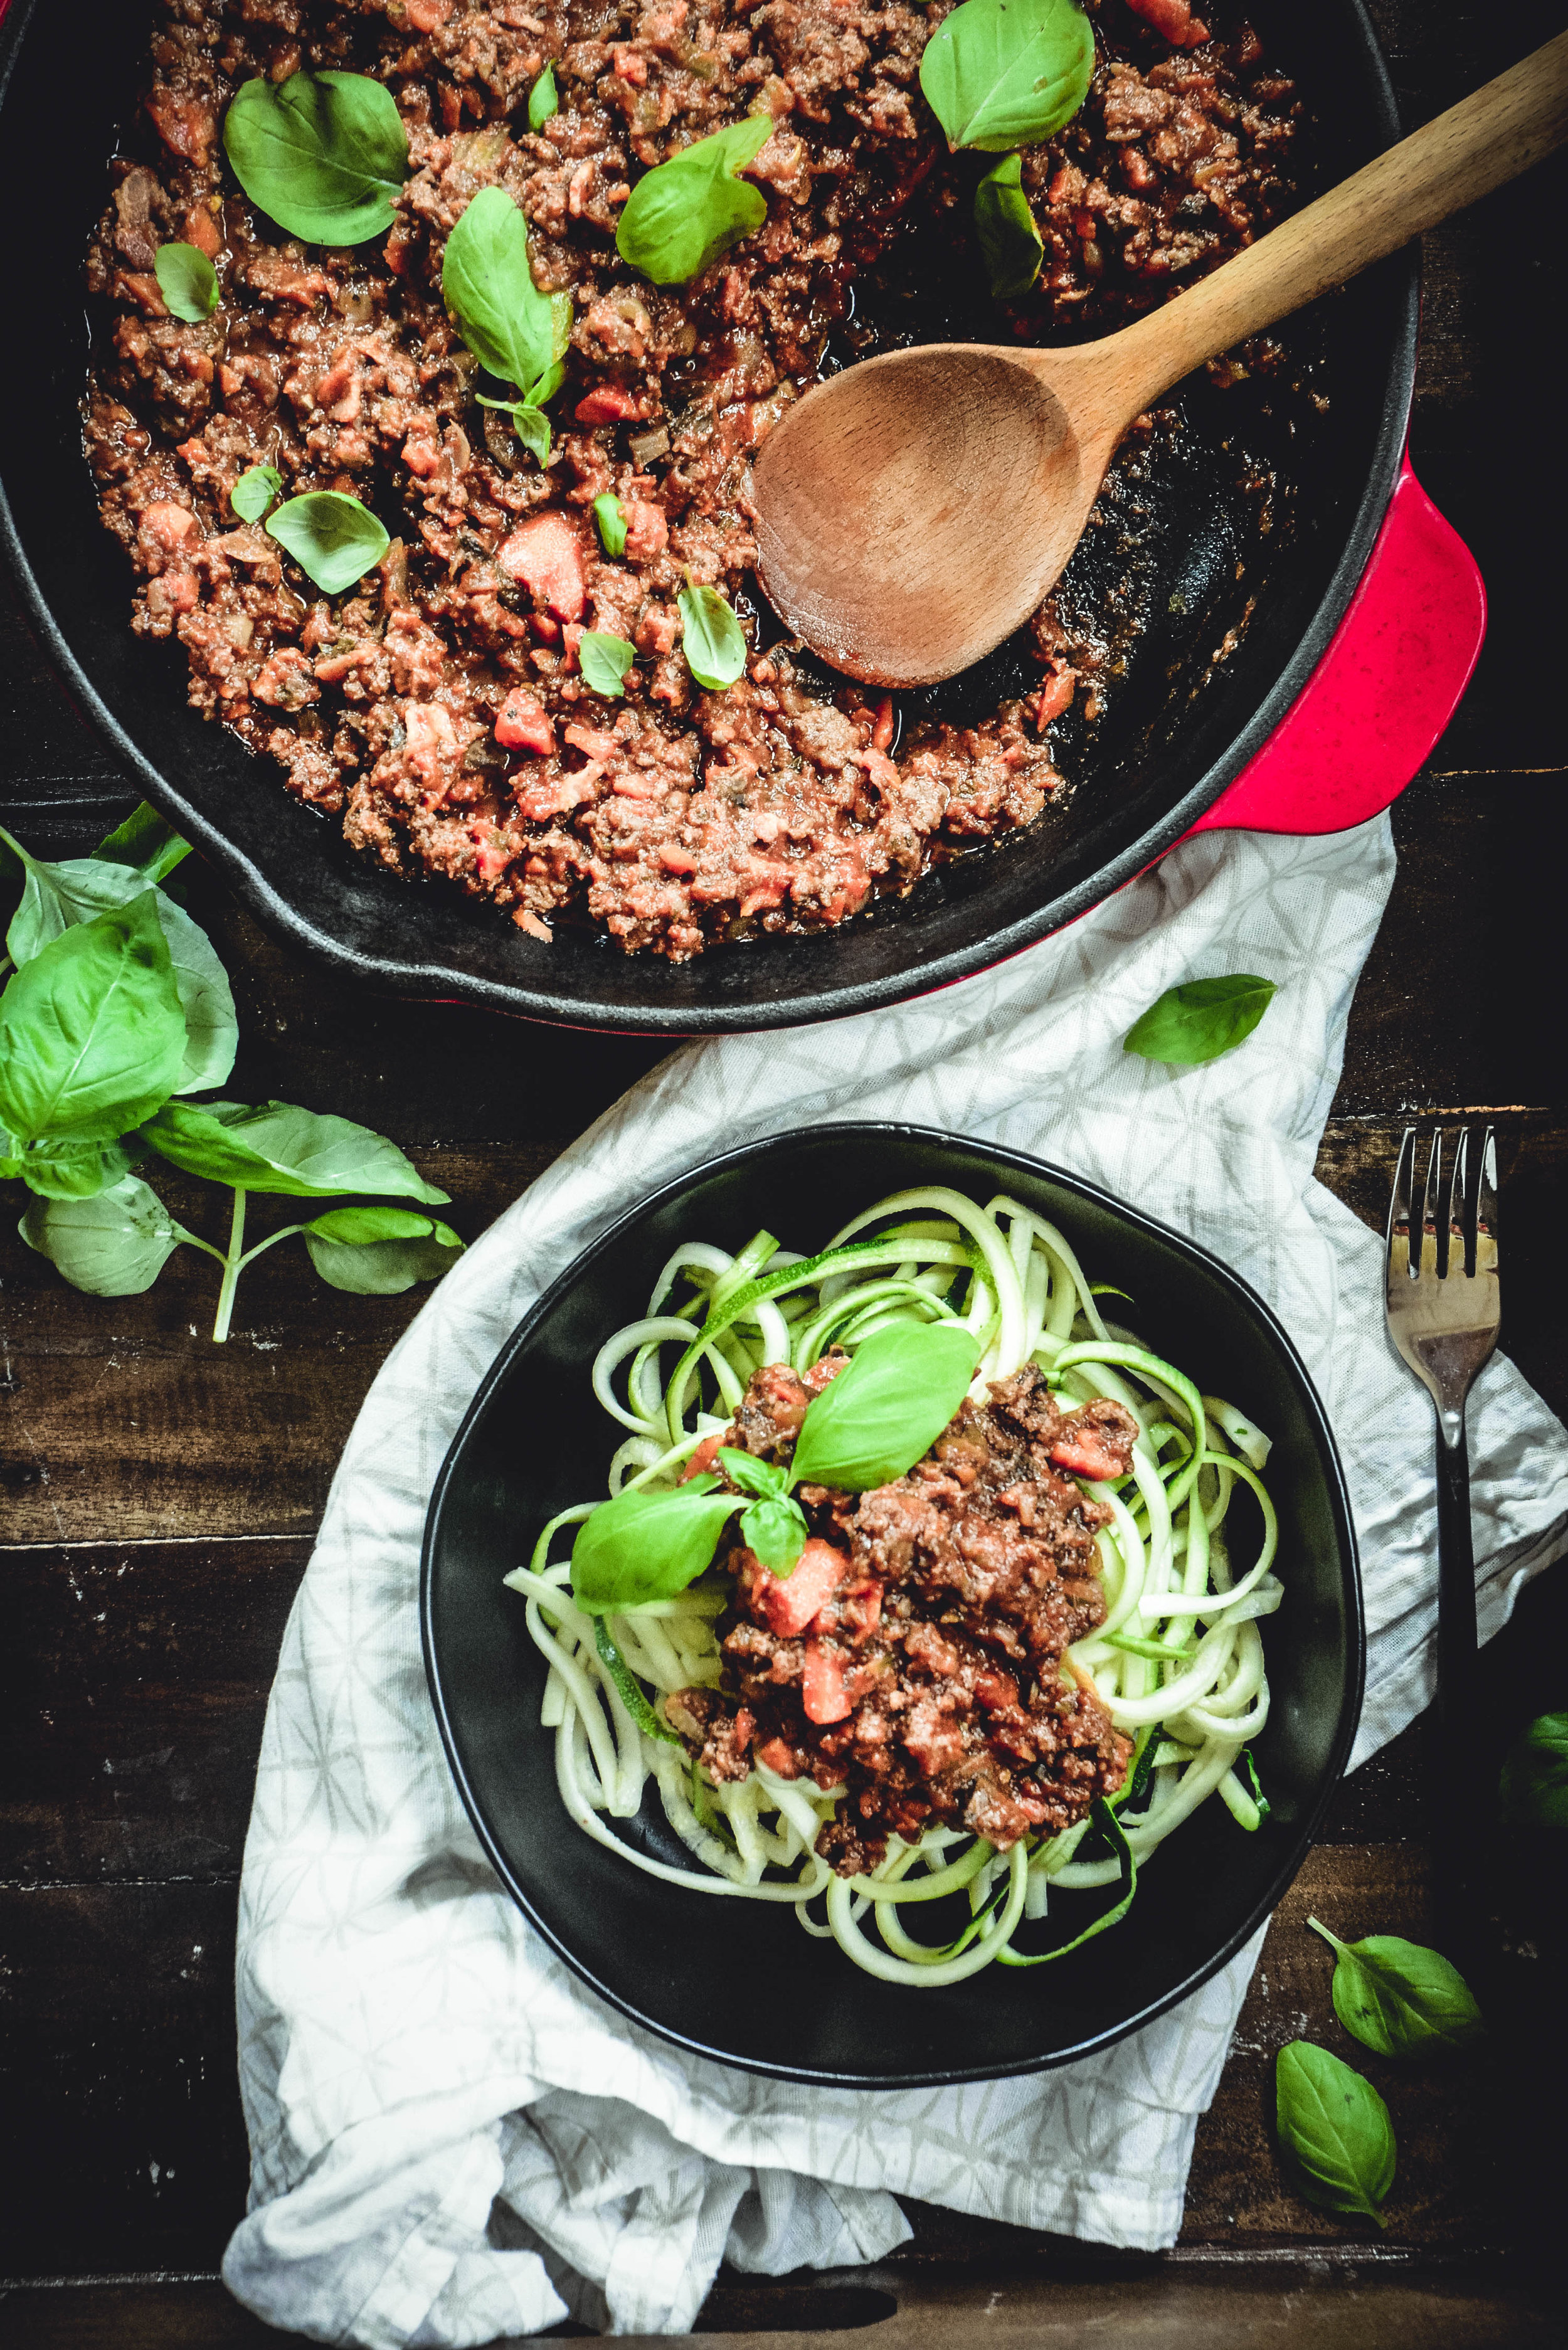  Want the ultimate comfort food? Bolognese sauce does it for me and I think you'll agree! With a few shortcuts this sauce can be ready in 45 minutes. It's loaded with vegetables, when served over zucchini noodles, it's low carb, paleo and whole 30. Check it out! #bolognesesauce, #bolognese, #paleo, #whole30, #meatsauce, #realfood, #calmeats, #lowcarb, #keto, #dairyfree, #glutenfree, #zucchininoodles, #zoodles 